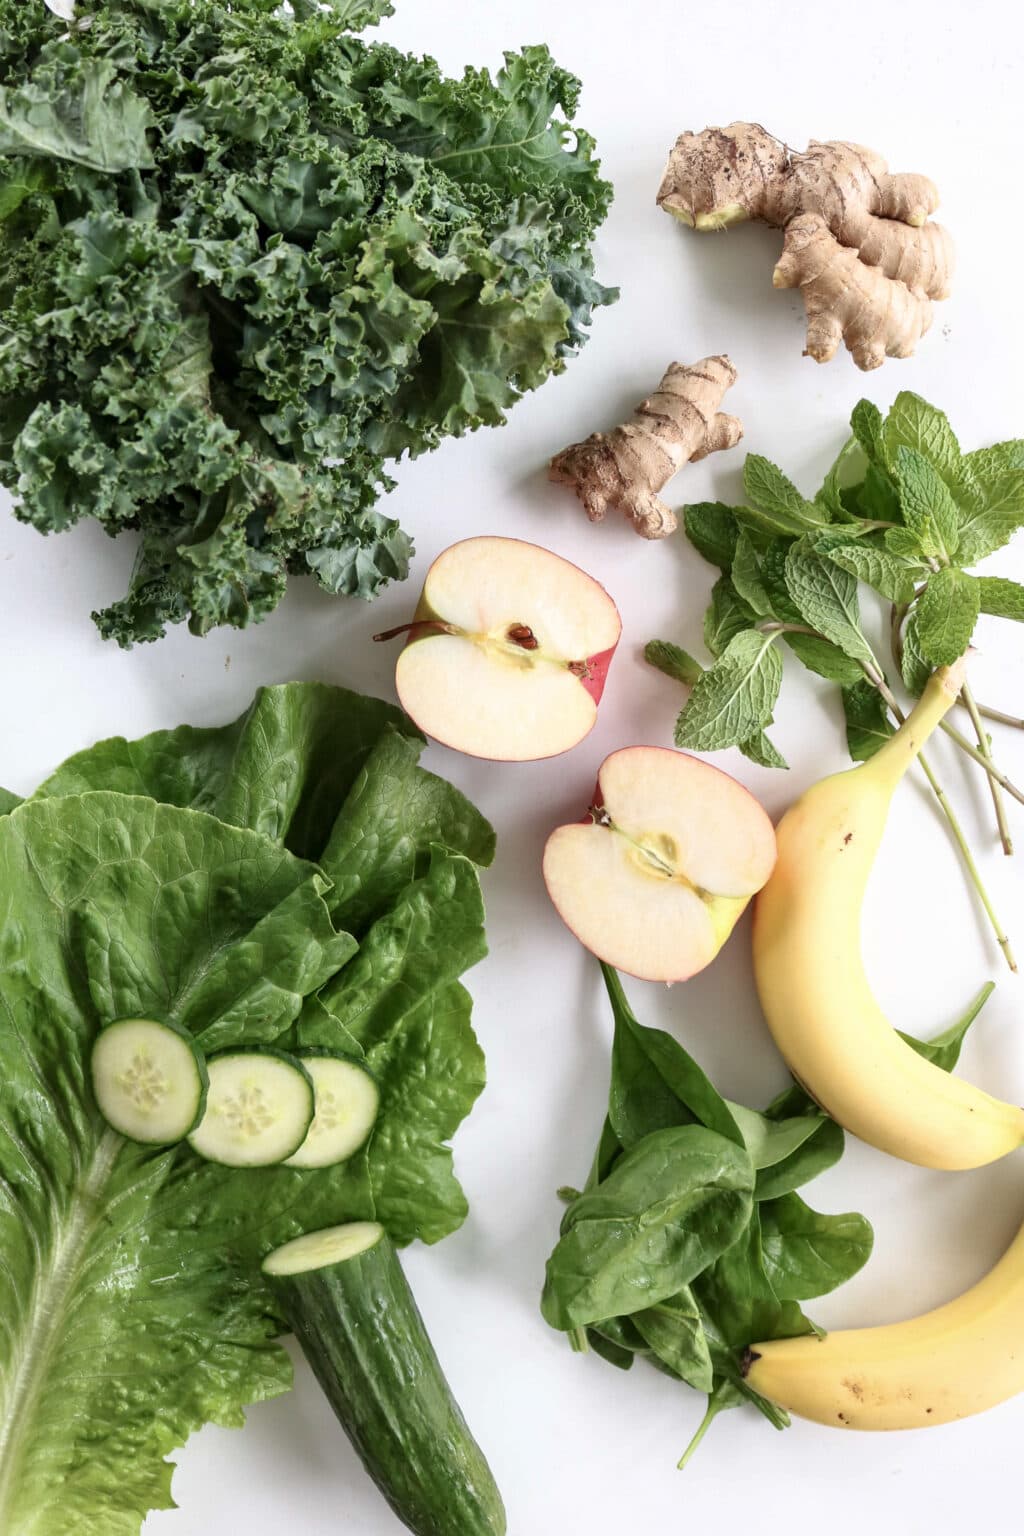 An overhead shot of ingredients for the green juice. There is curly green kale, two thumb-sized pieces of ginger, an apple cut in half, mint, a banana, romaine lettuce, and cucumber